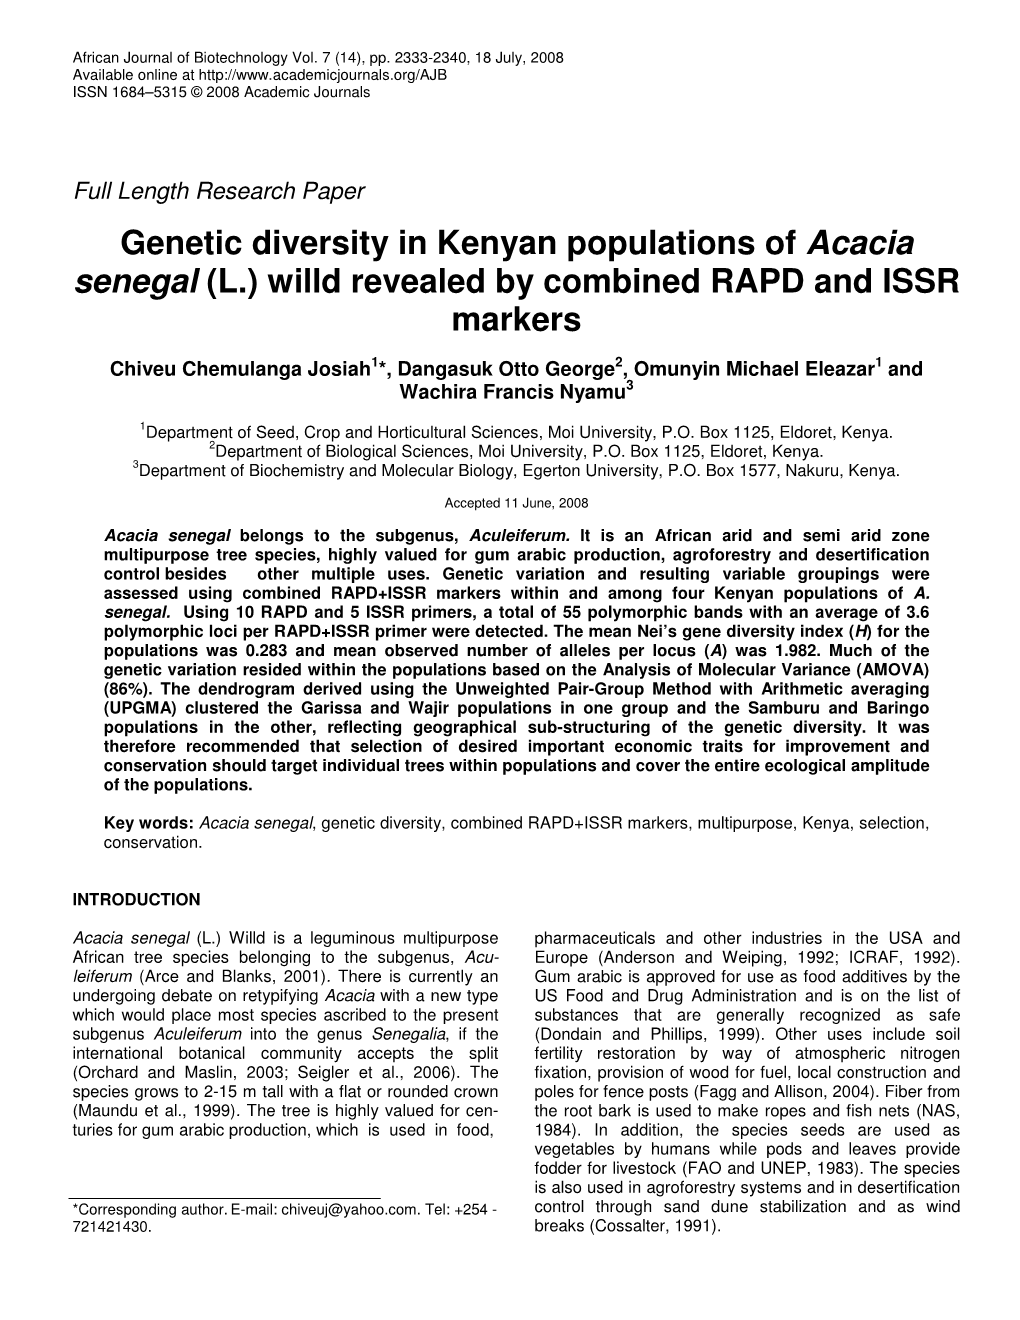 Genetic Diversity in Kenyan Populations of Acacia Senegal (L.) Willd Revealed by Combined RAPD and ISSR Markers